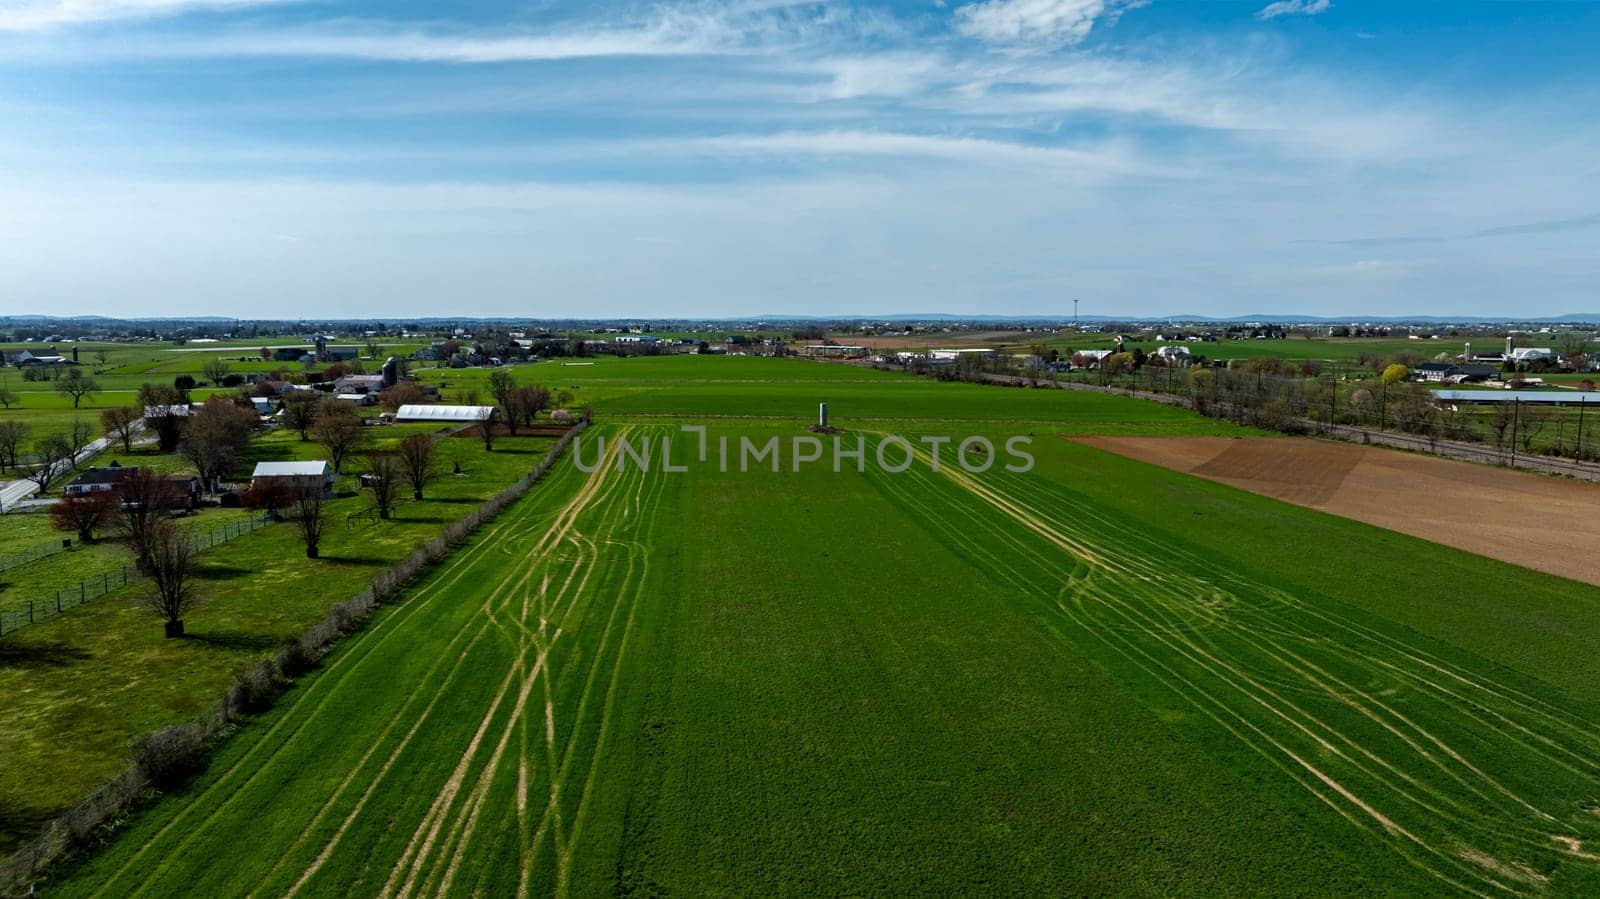 An Aerial View Of A Lush, Vibrant Farm Landscape With Distinct Green Fields.